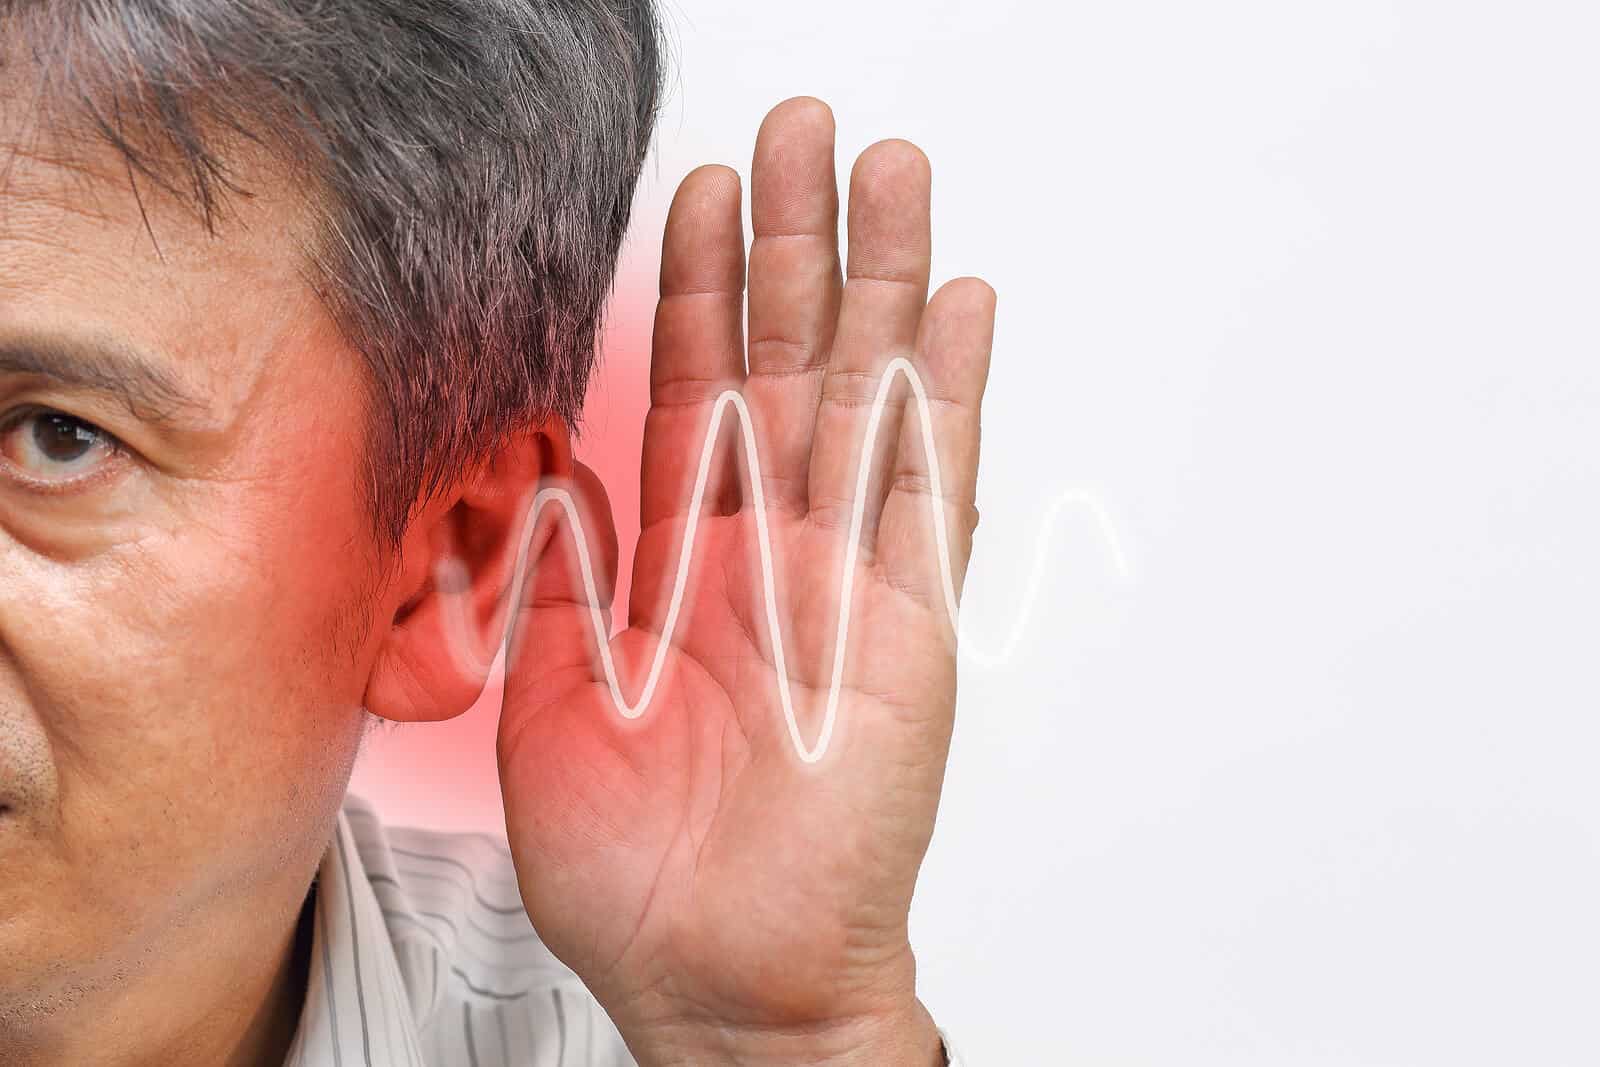 Featured image for “A Possible Link between Tinnitus & Painkiller Use”